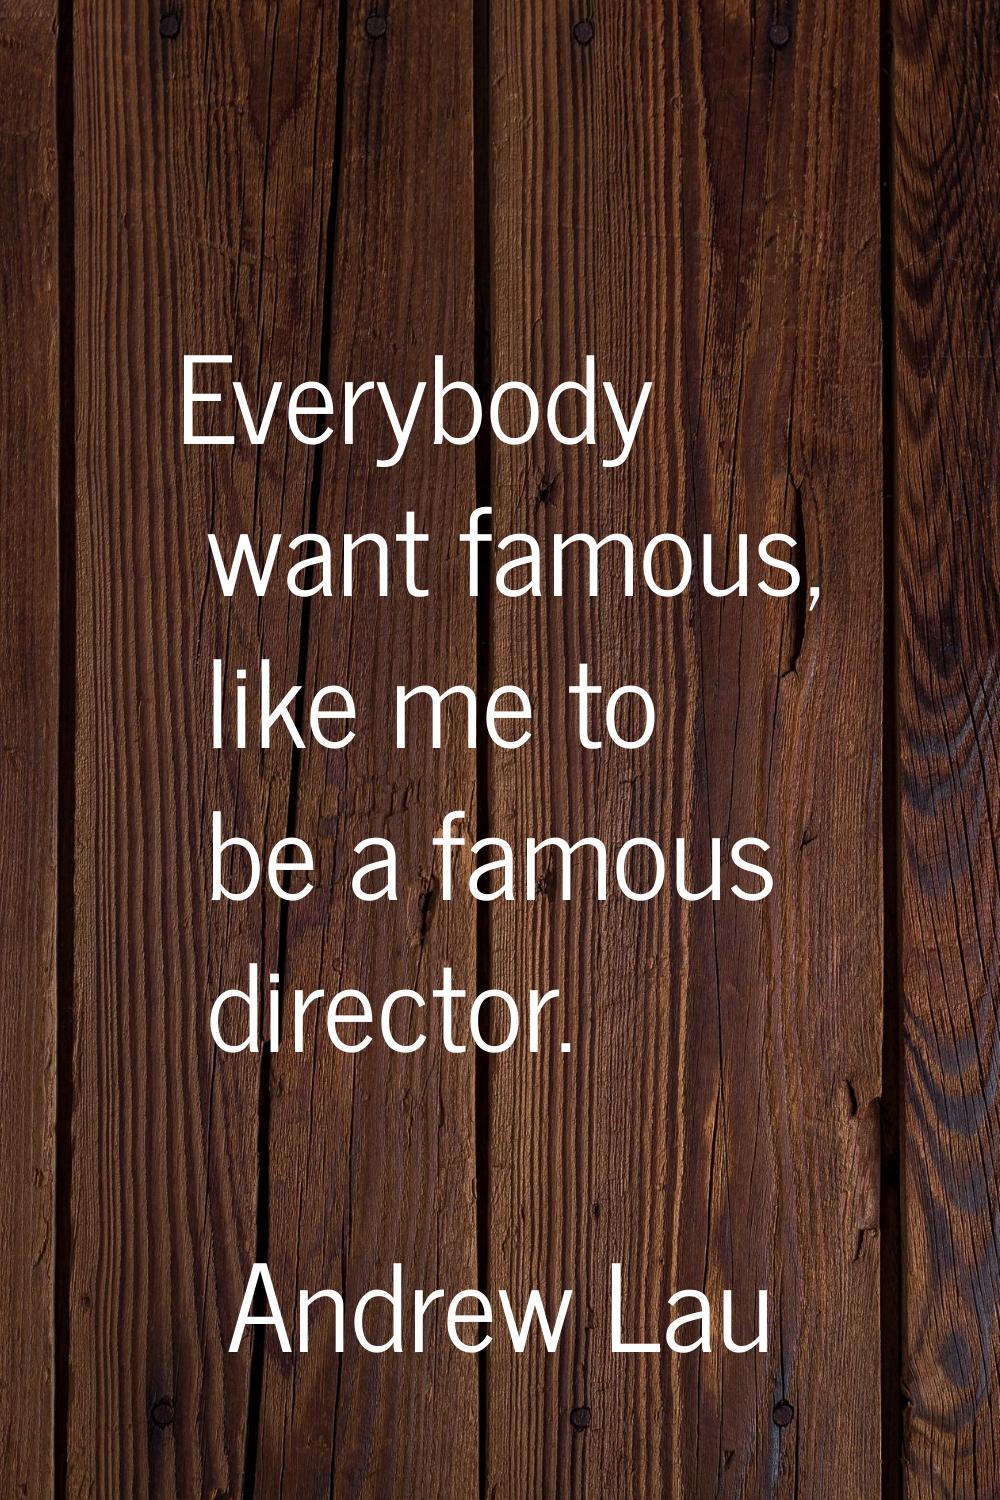 Everybody want famous, like me to be a famous director.